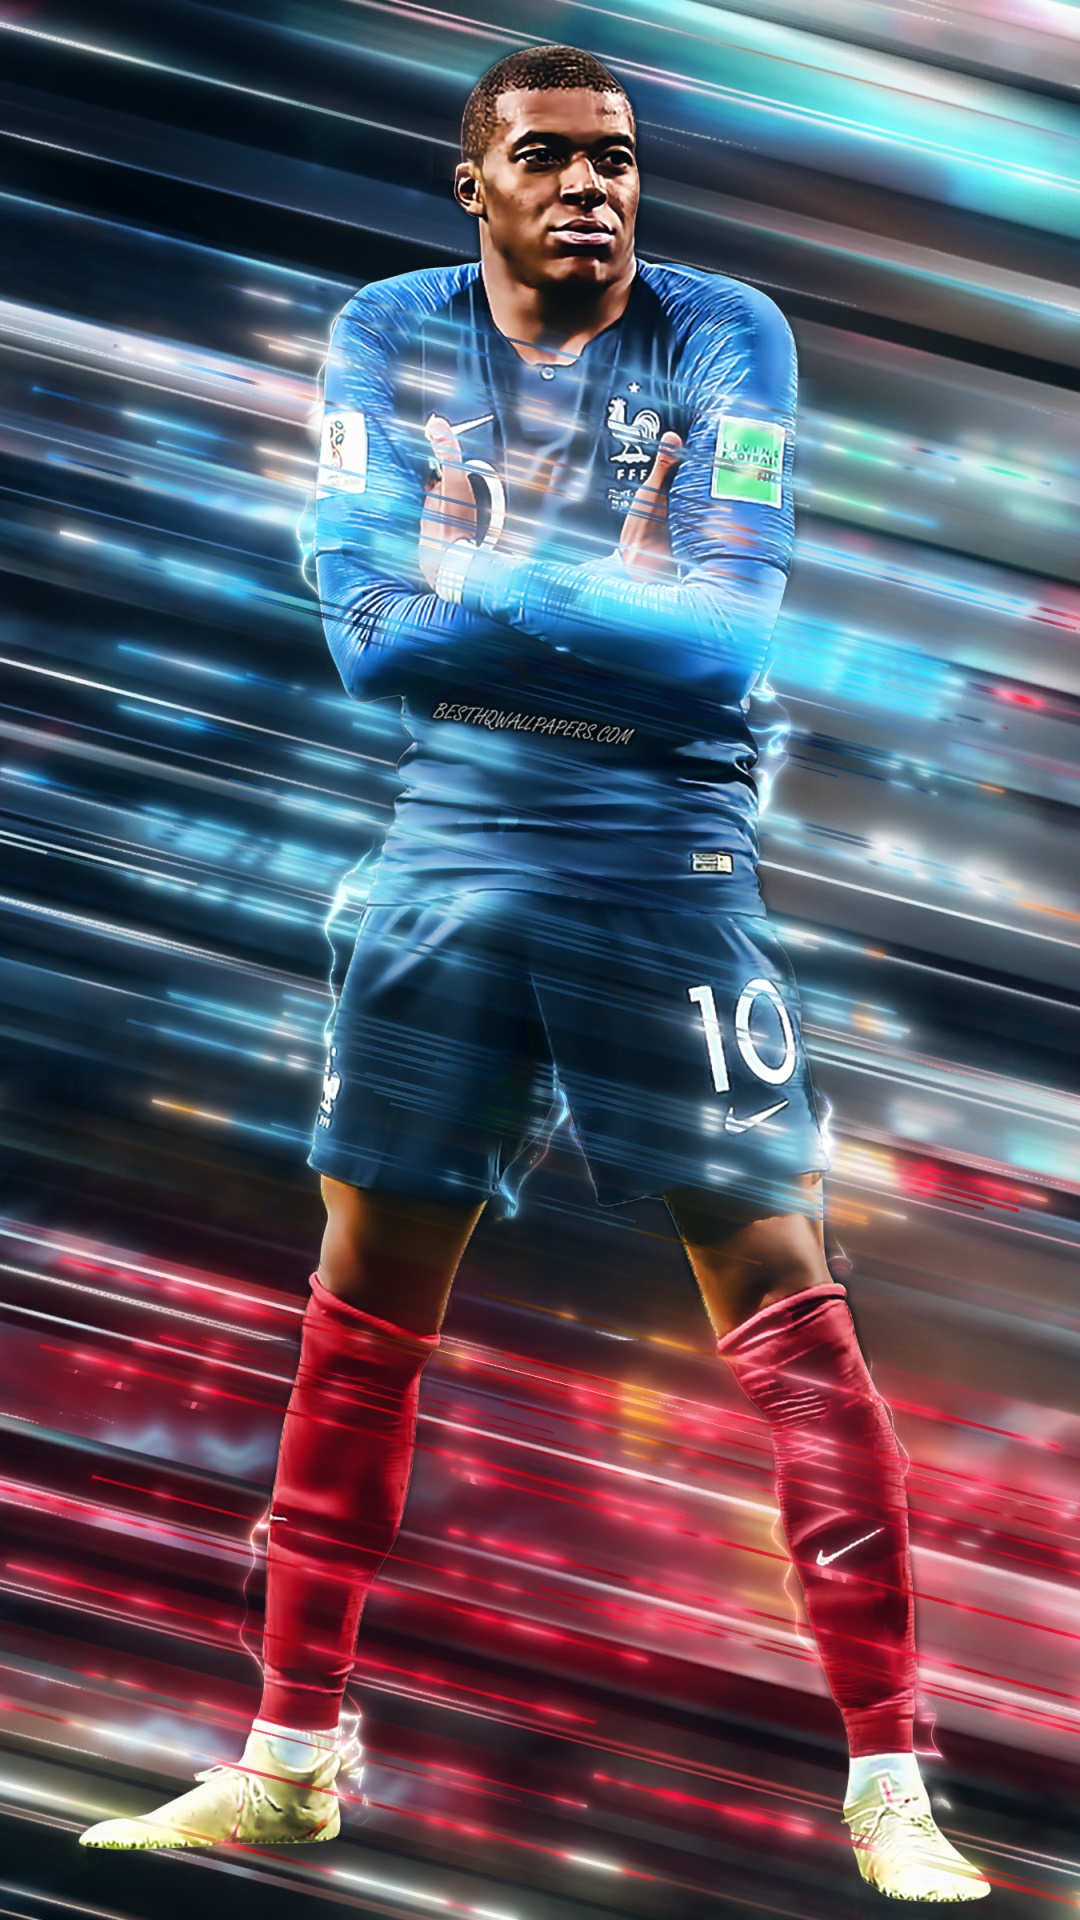 Wallpapers ID: 393135 / Sports Kylian Mbappé Phone Wallpaper, French, Soccer, 1080x1920 free download